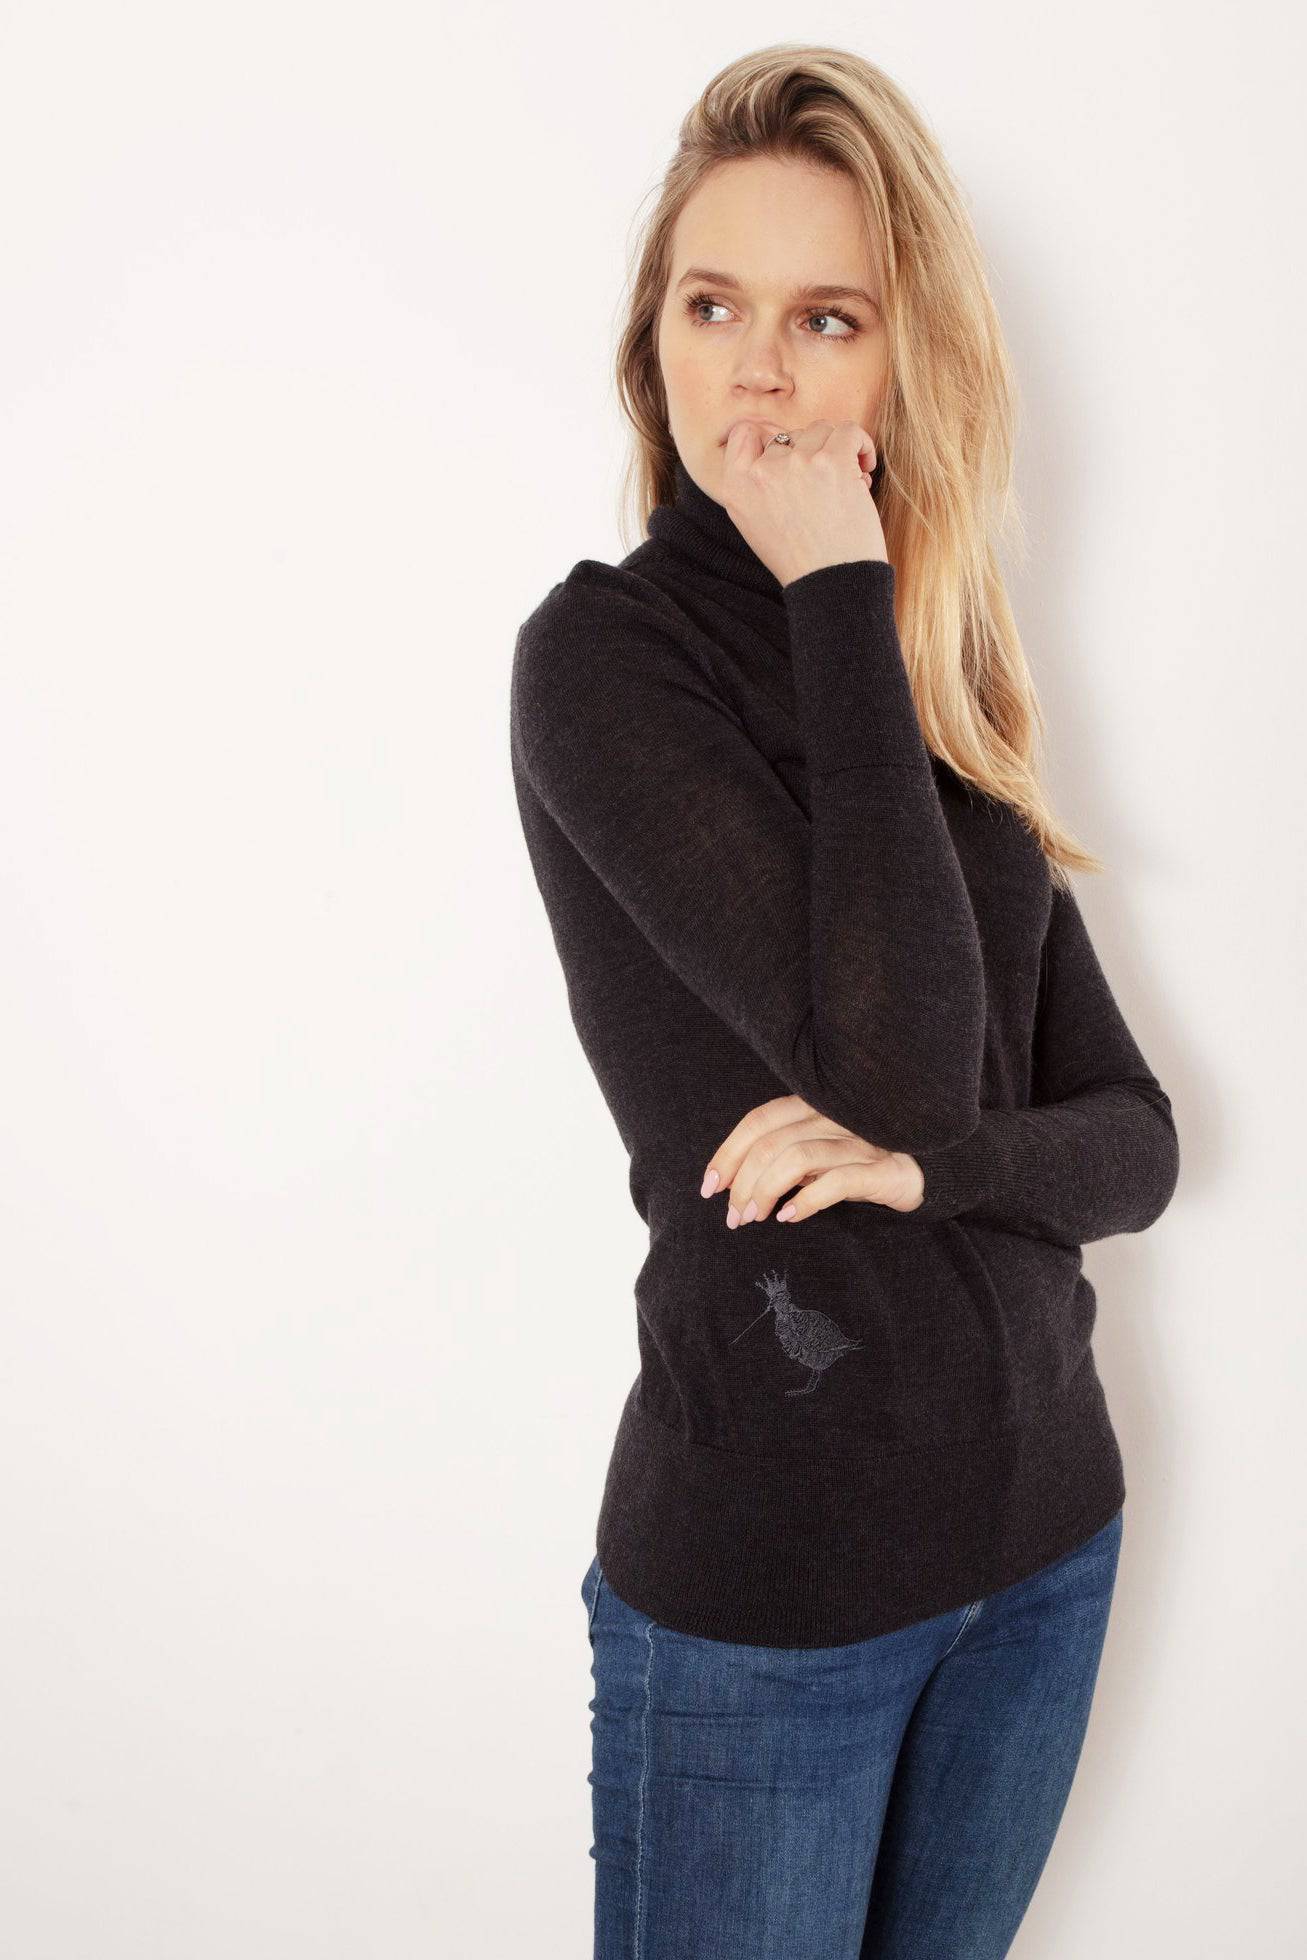 Extra Fine Merino Wool Polo Neck Jumper in Charcoal Grey By Woodcock & Cavendish for sale - Woodcock and Cavendish